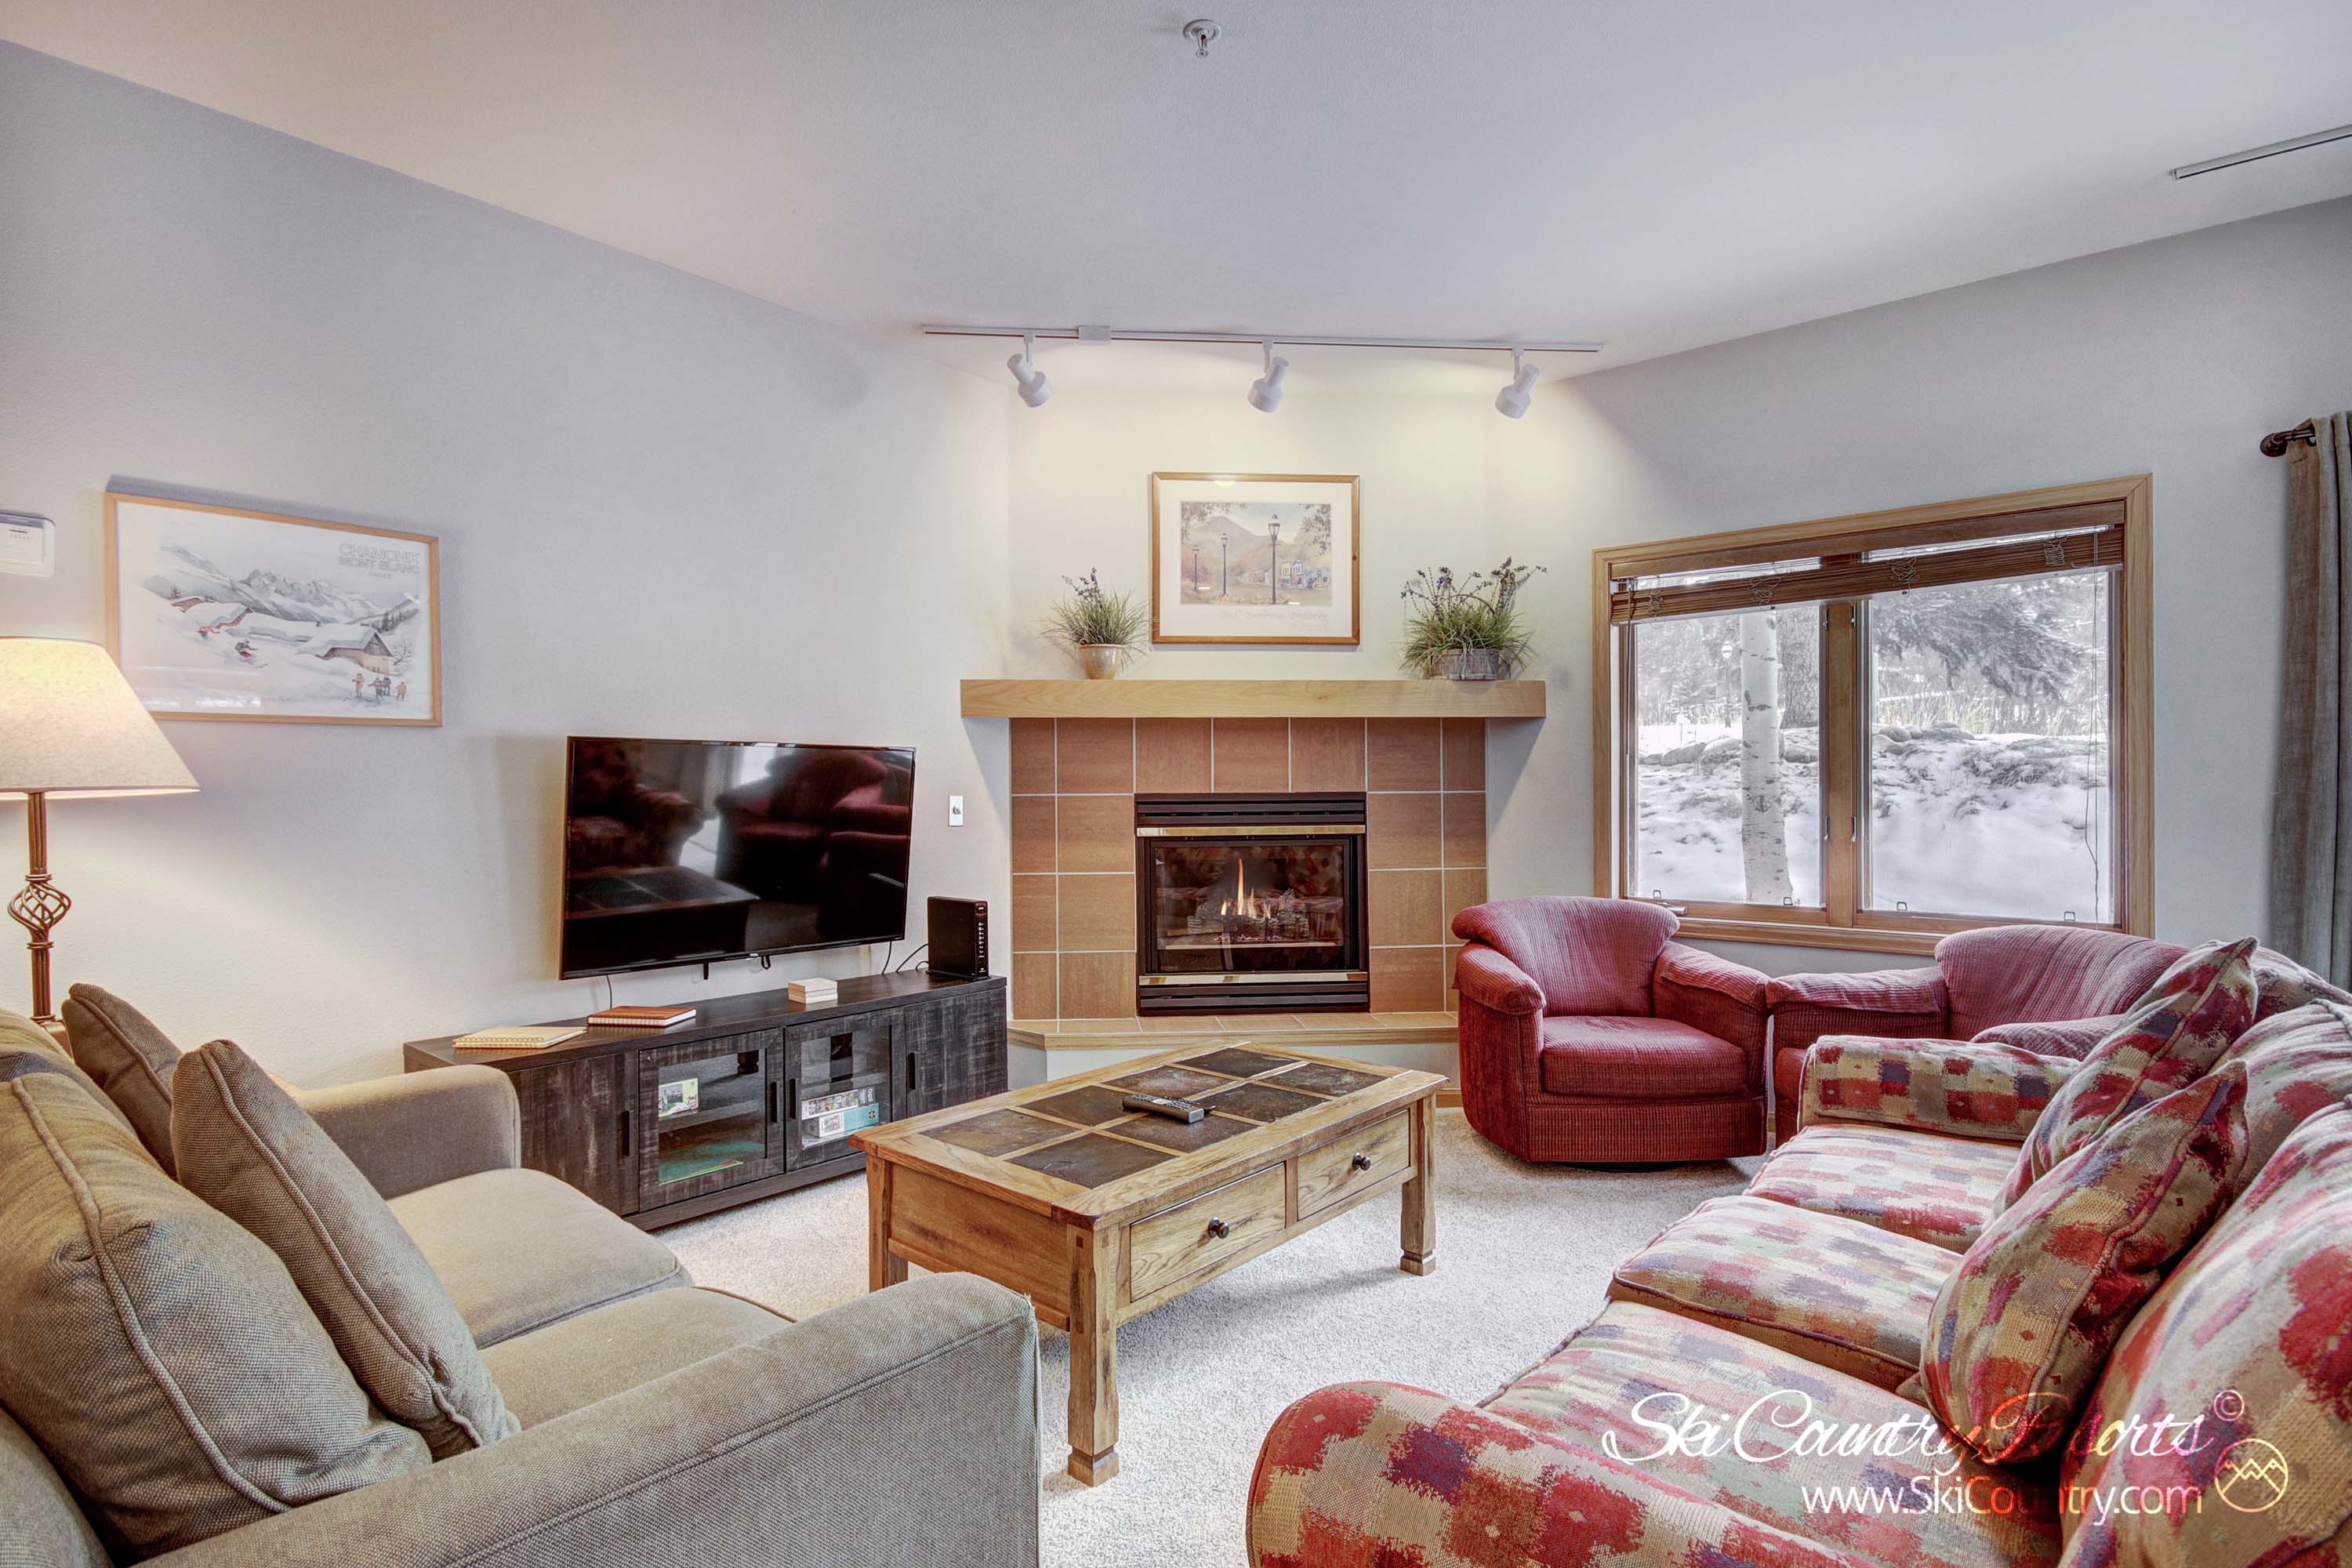 The spacious living room, boasting ample seating options, a cozy gas fireplace and flatscreen TV is guaranteed to delight with its breathtaking mountain views and abundance of natural light. An ideal sanctuary to unwind after a day of adventure.